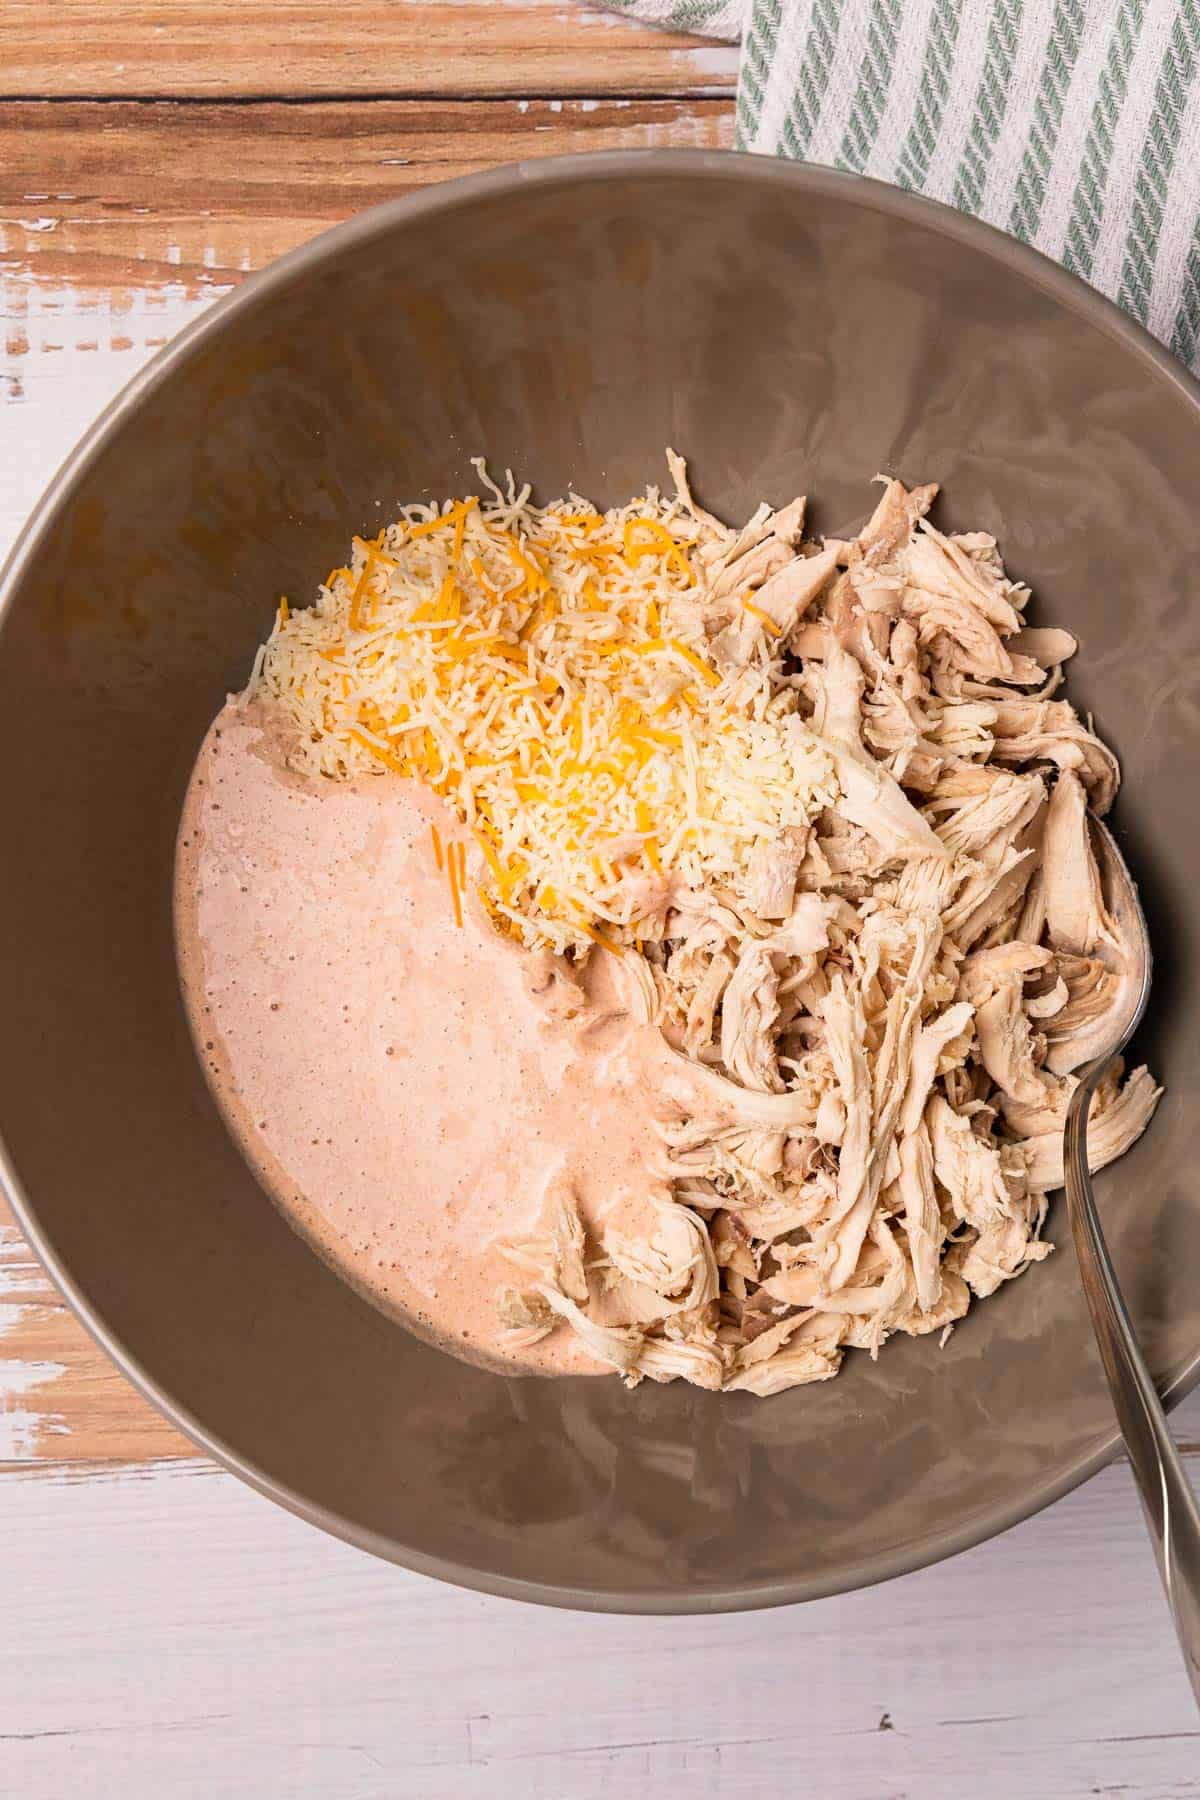 Add chicken, salsa, and cheese to bowl